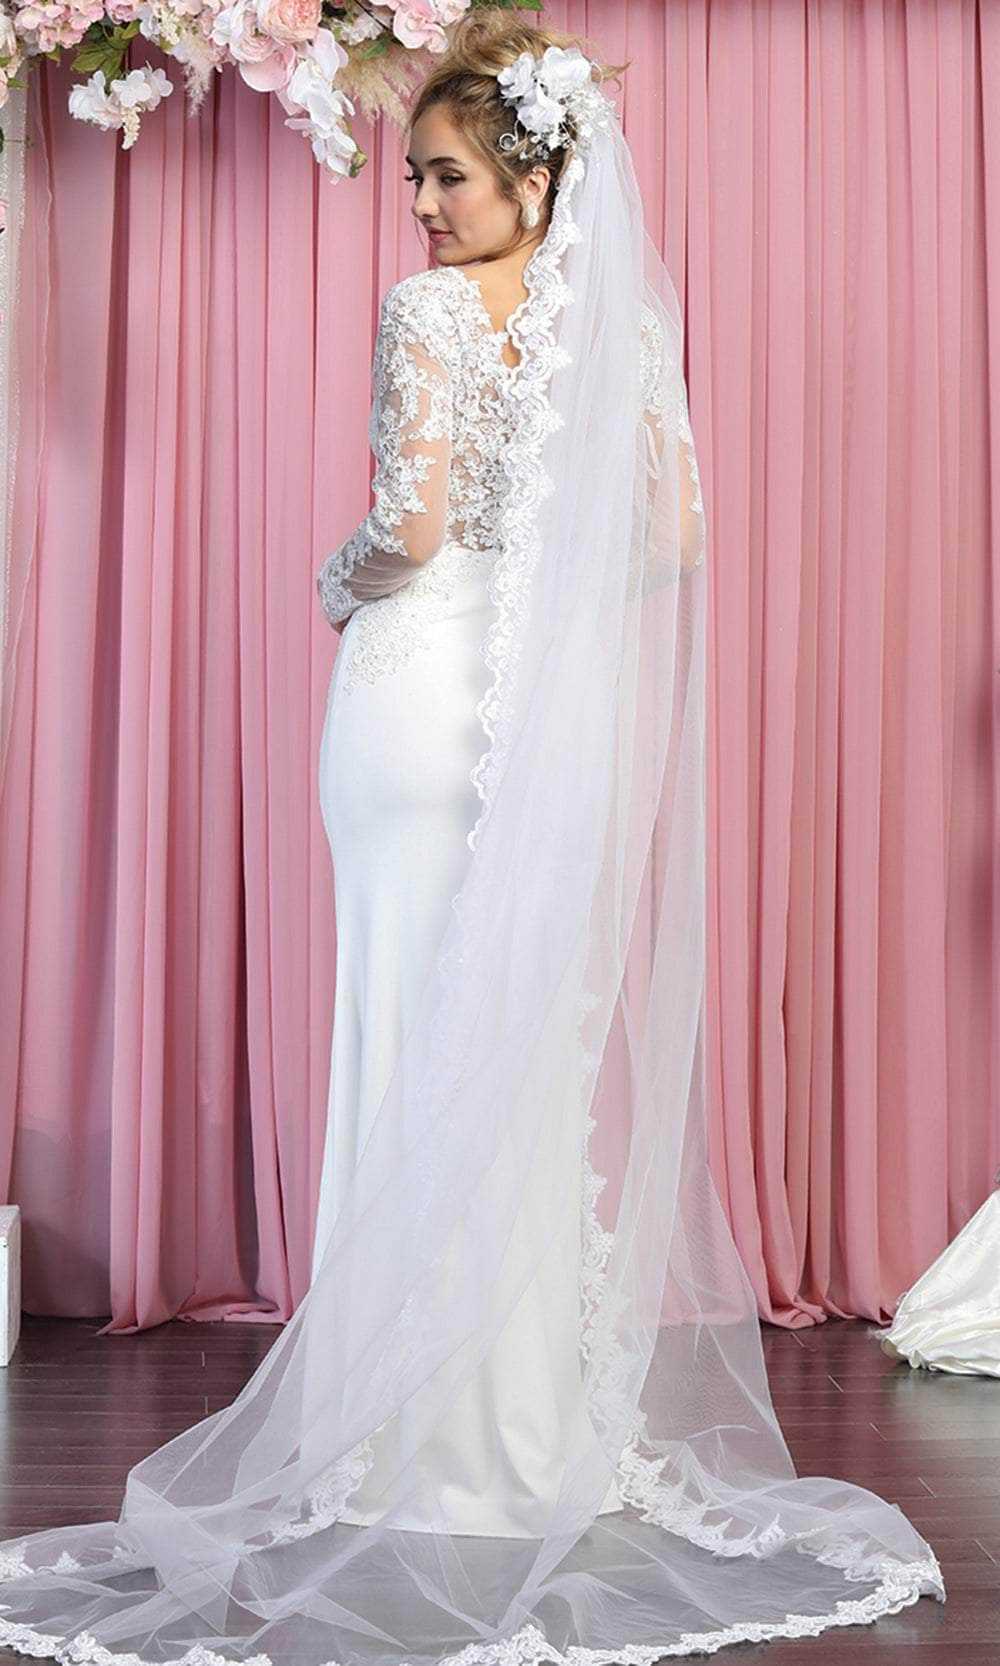 May Queen, May Queen RQ7901 - Long Sleeves Low-cut V-neck Wedding Gown